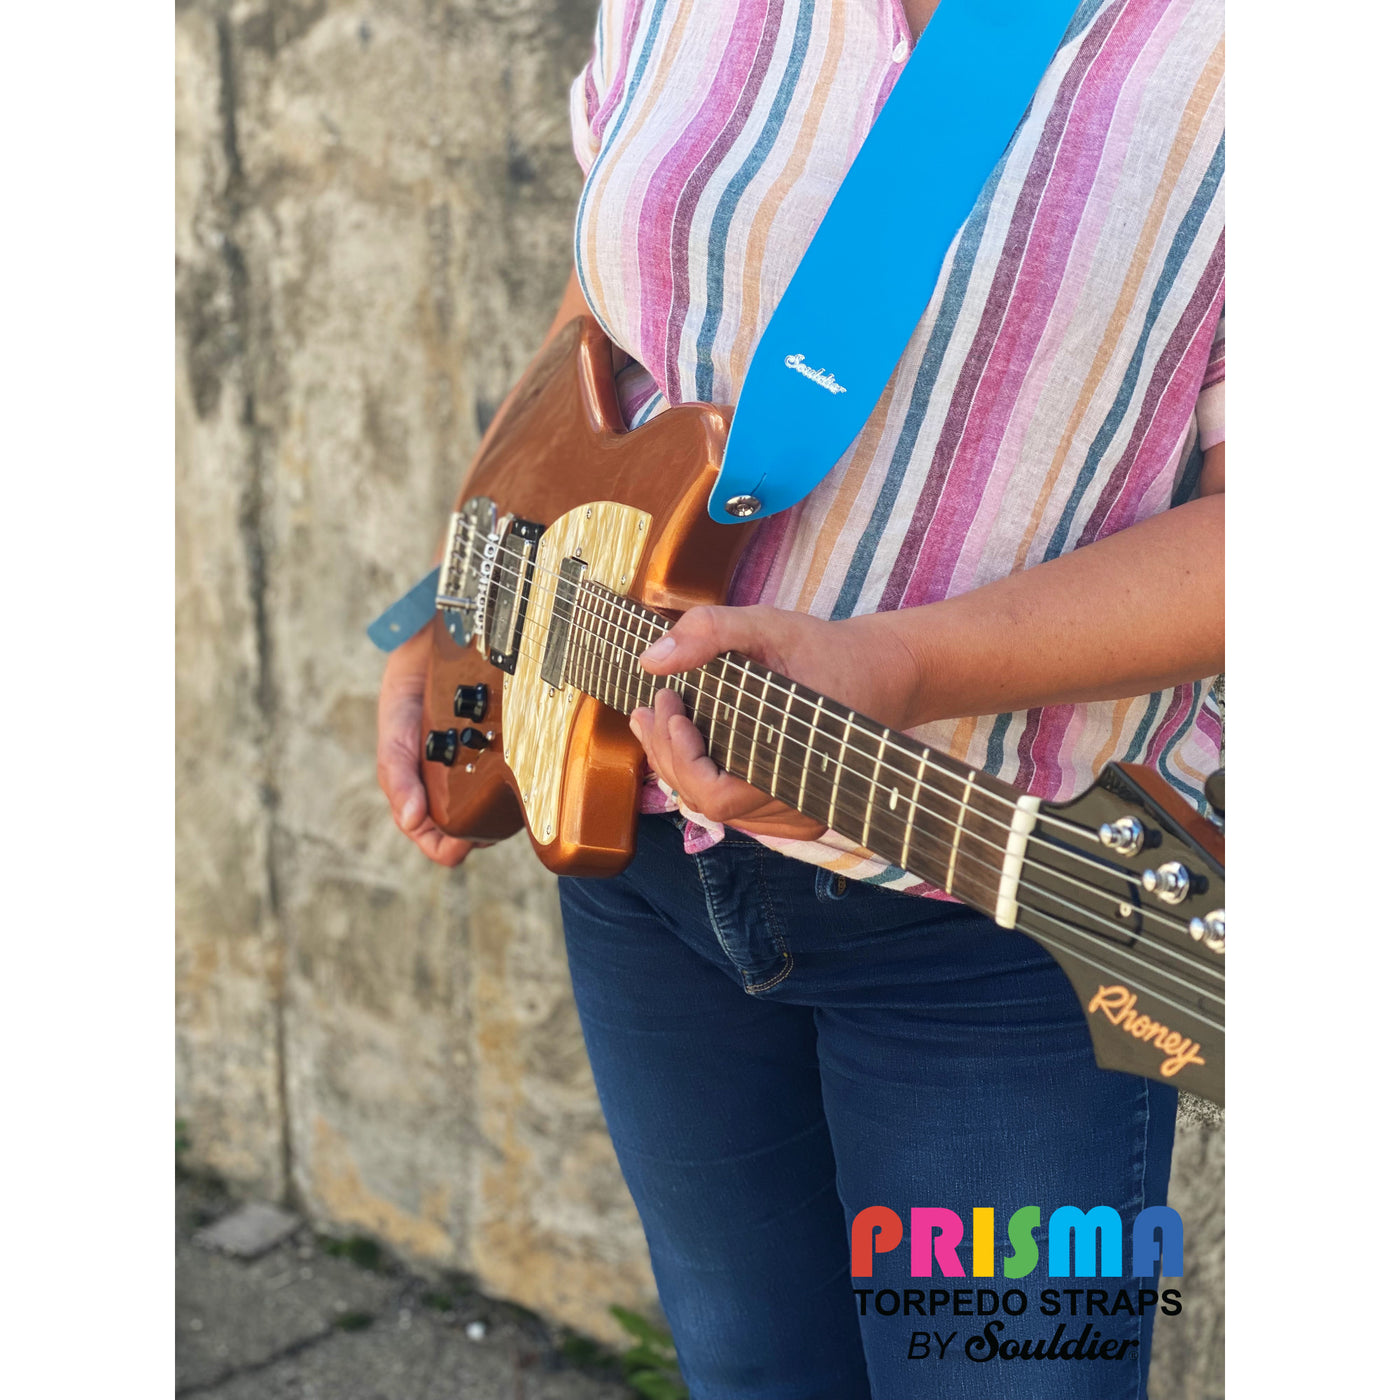 Souldier PSMGSTL - Handmade Prisma Guitar Strap for Bass, Electric or Acoustic Guitar, 2.5 Inches Wide and Adjustable Length from 43" to 57" Made in the USA, Teal